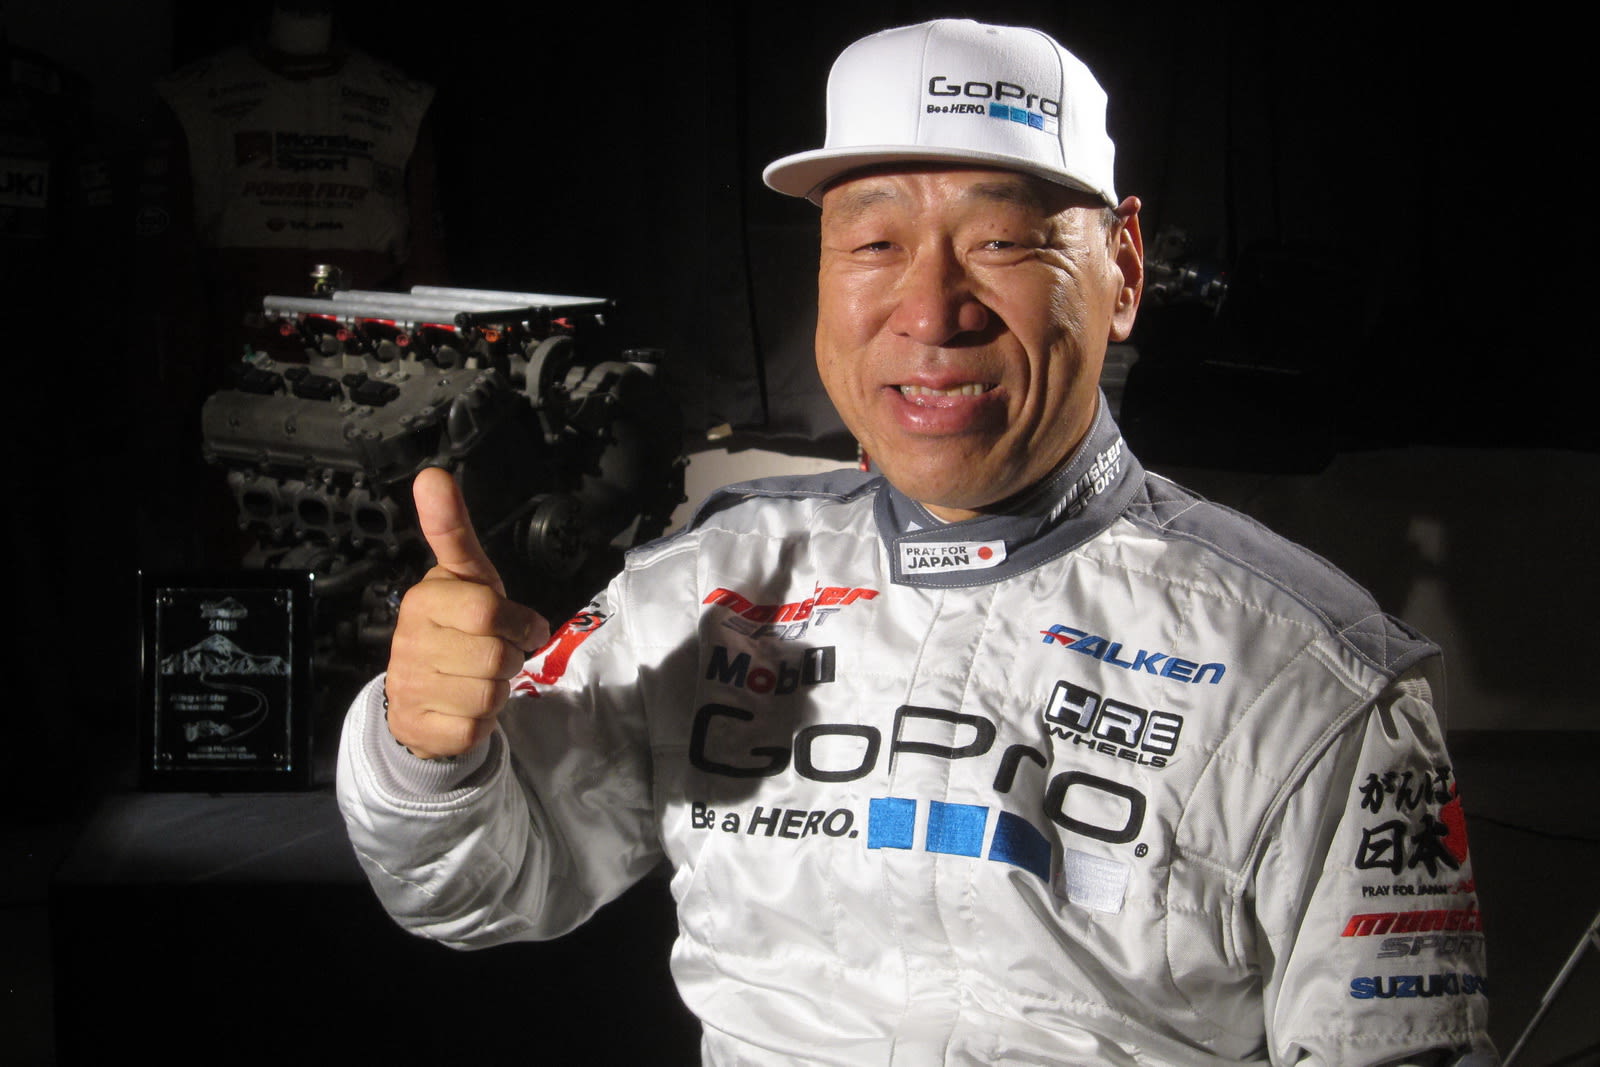 Hillclimb: Nobuhiro Tajima (hillclimb purists say dirt and mixed-surface Pikes Peak is the best, and with Tajima-san’s record on the surface it’s hard to find a better driver)